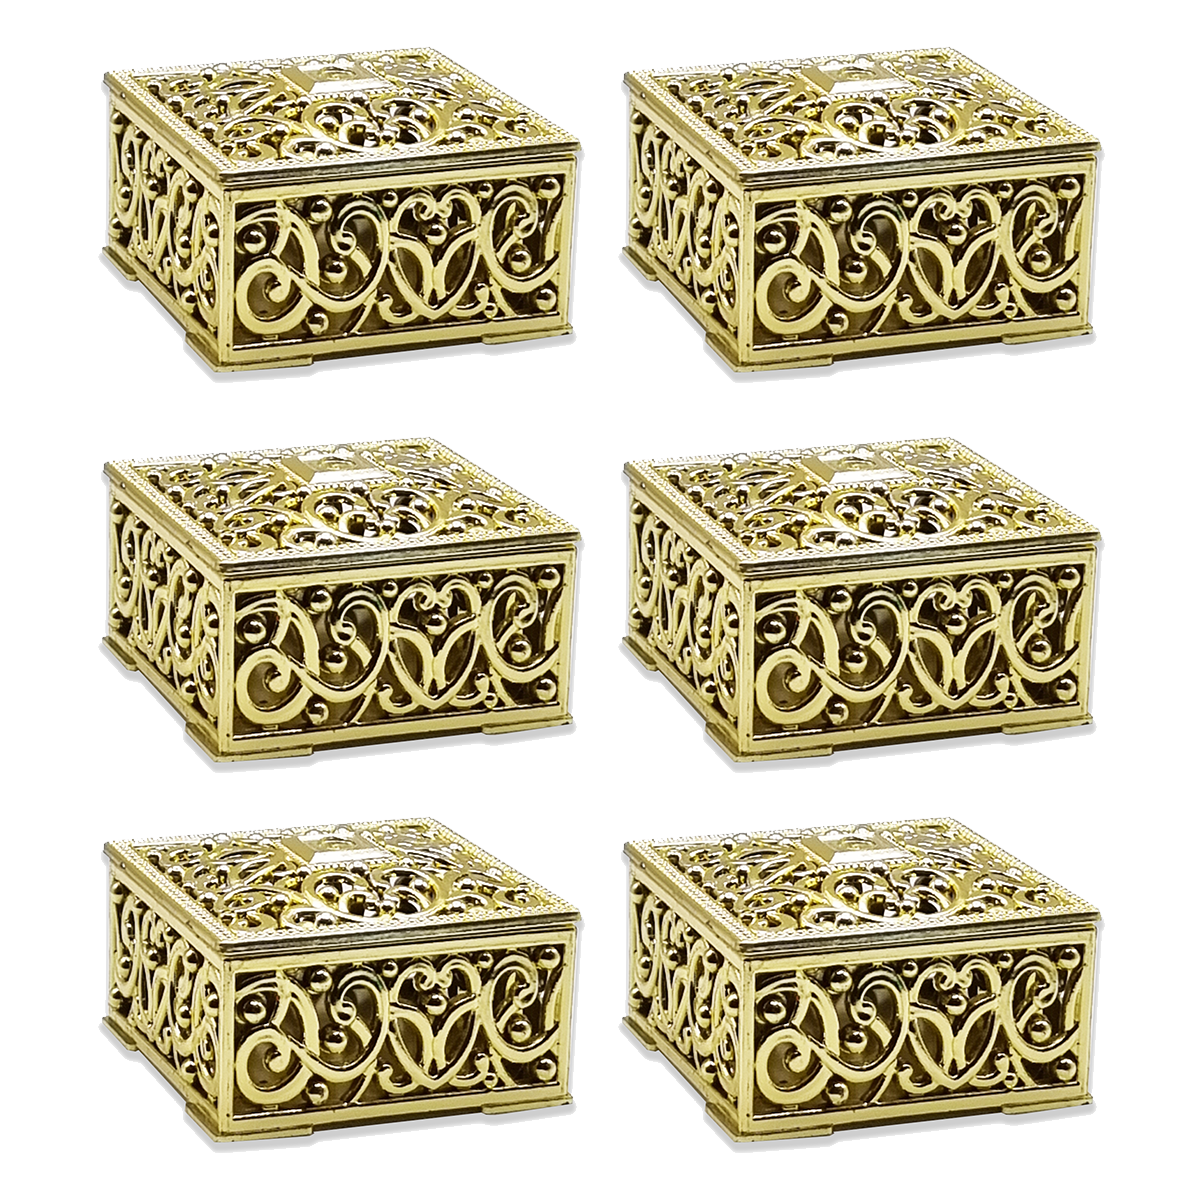 Cromoxome Square Gold Plastic Decorative Wedding Favor Box 5.5x5.5x2.6 Cms  (Pack of 6) - Willow